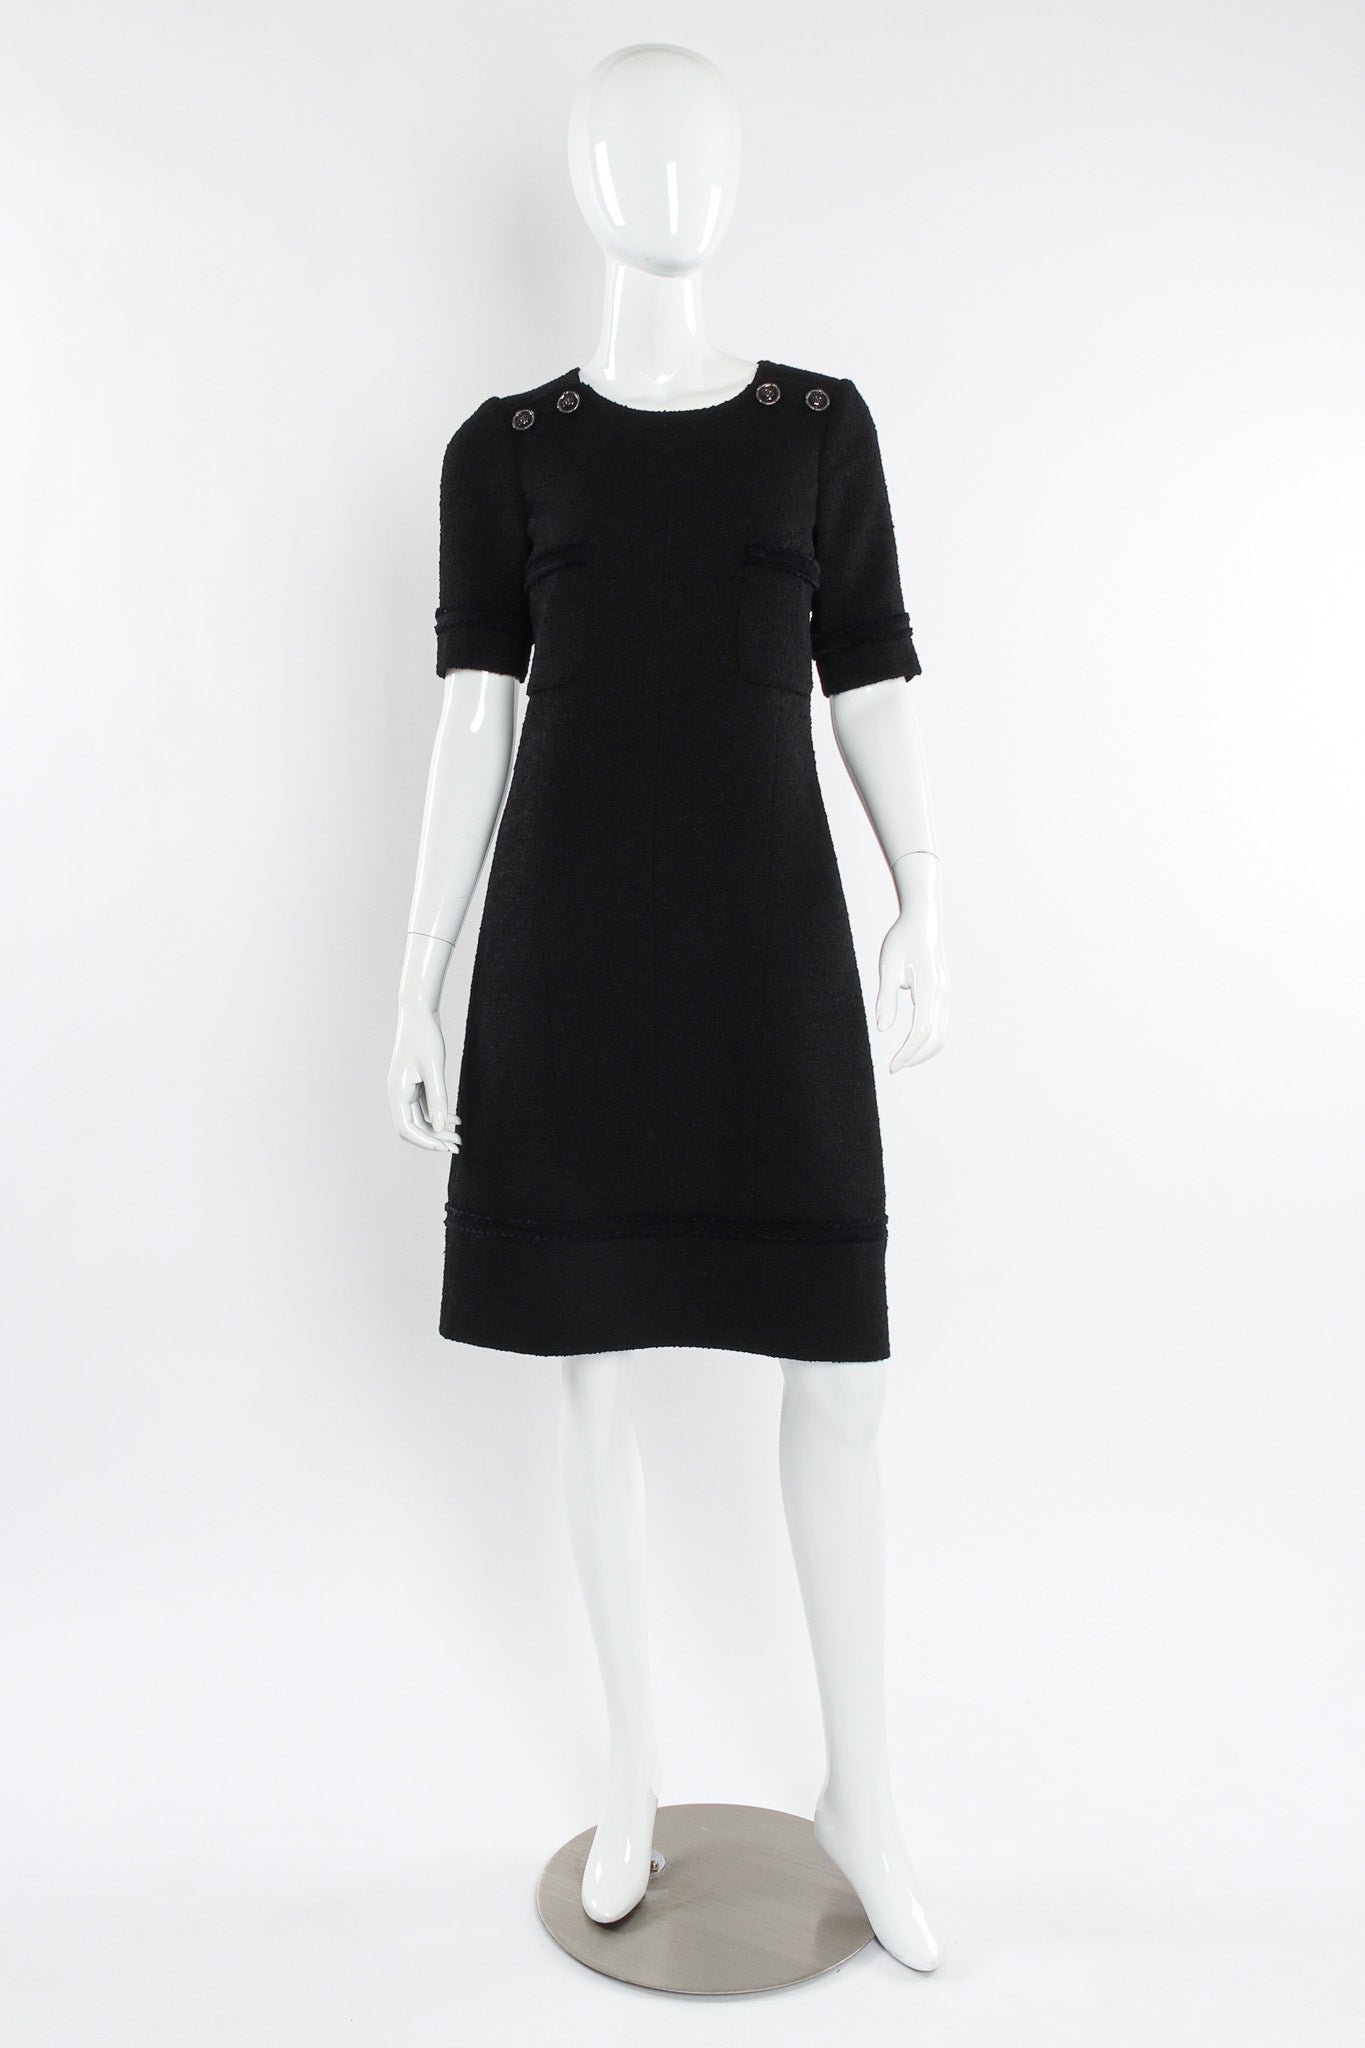 LOOKAST Amy Tweed Dress (2 Colors) by W Concept